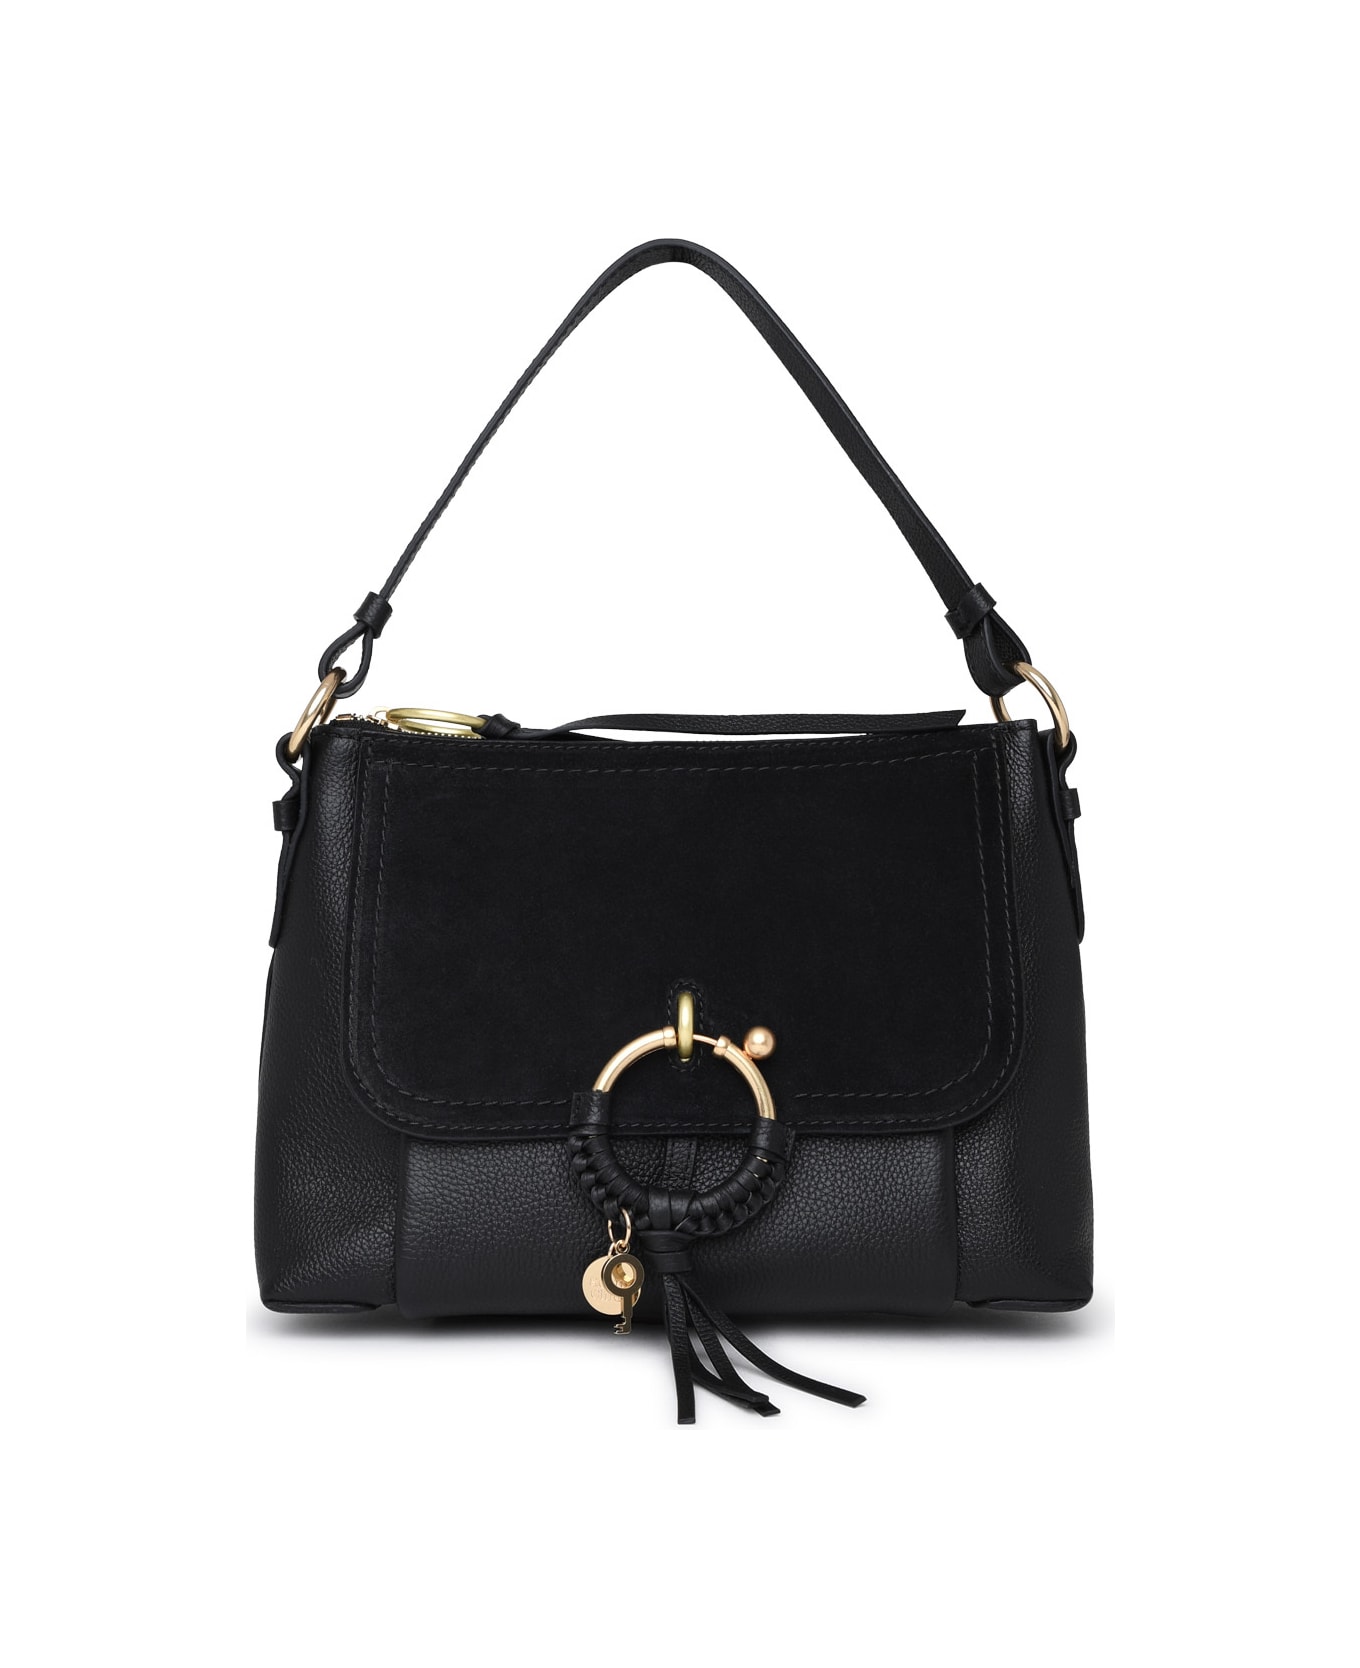 See by Chloé Black Leather Small Joan Bag - Black トートバッグ